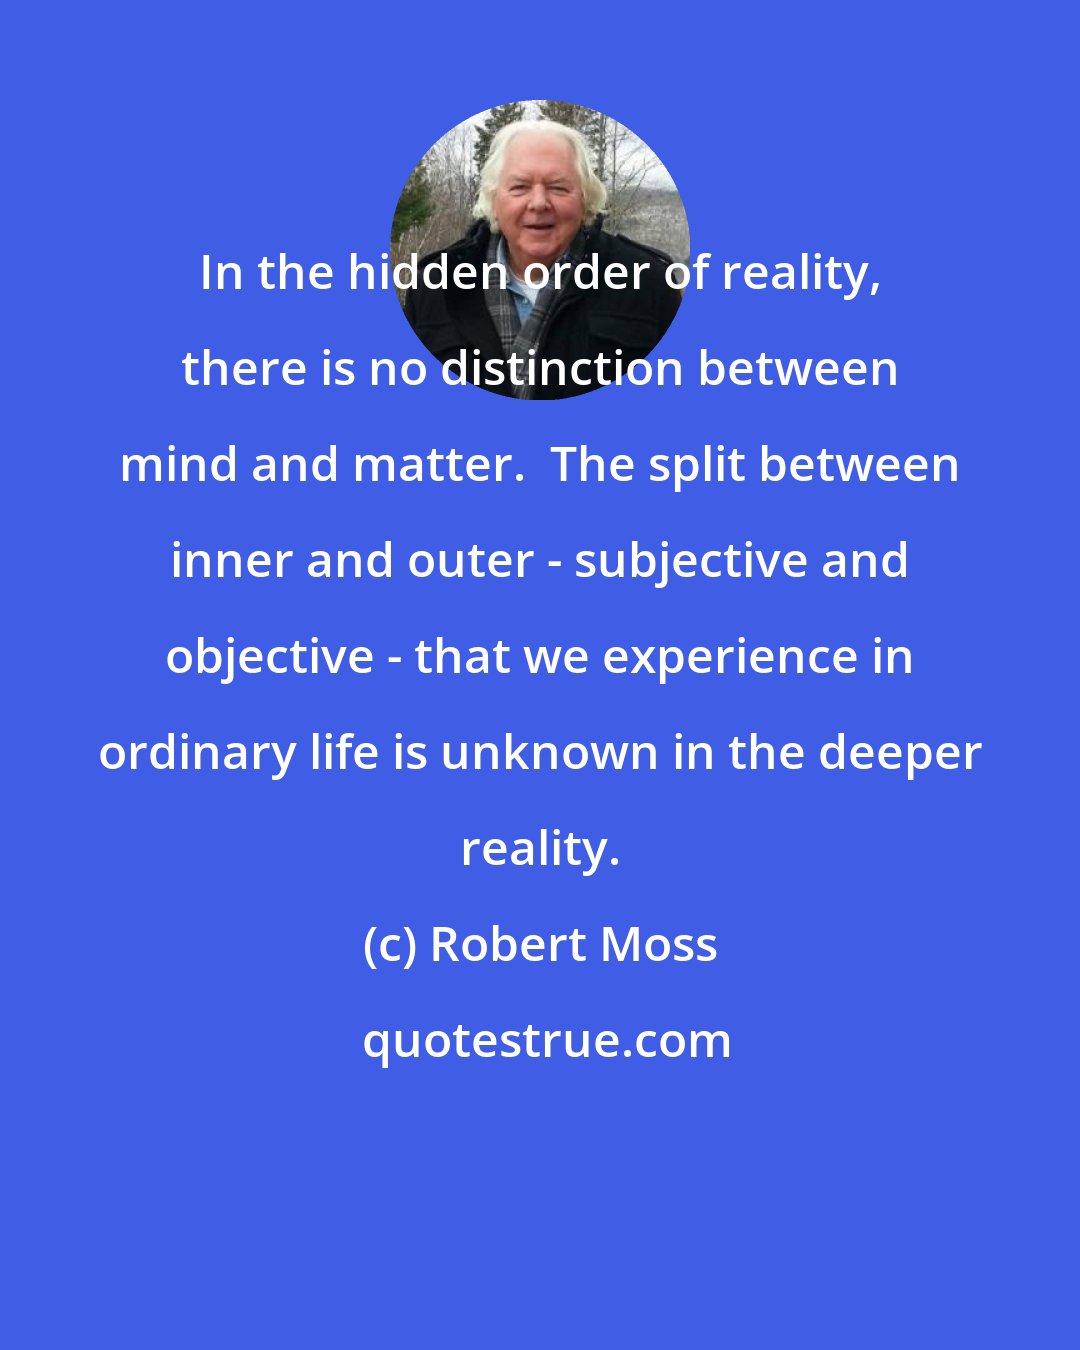 Robert Moss: In the hidden order of reality, there is no distinction between mind and matter.  The split between inner and outer - subjective and objective - that we experience in ordinary life is unknown in the deeper reality.